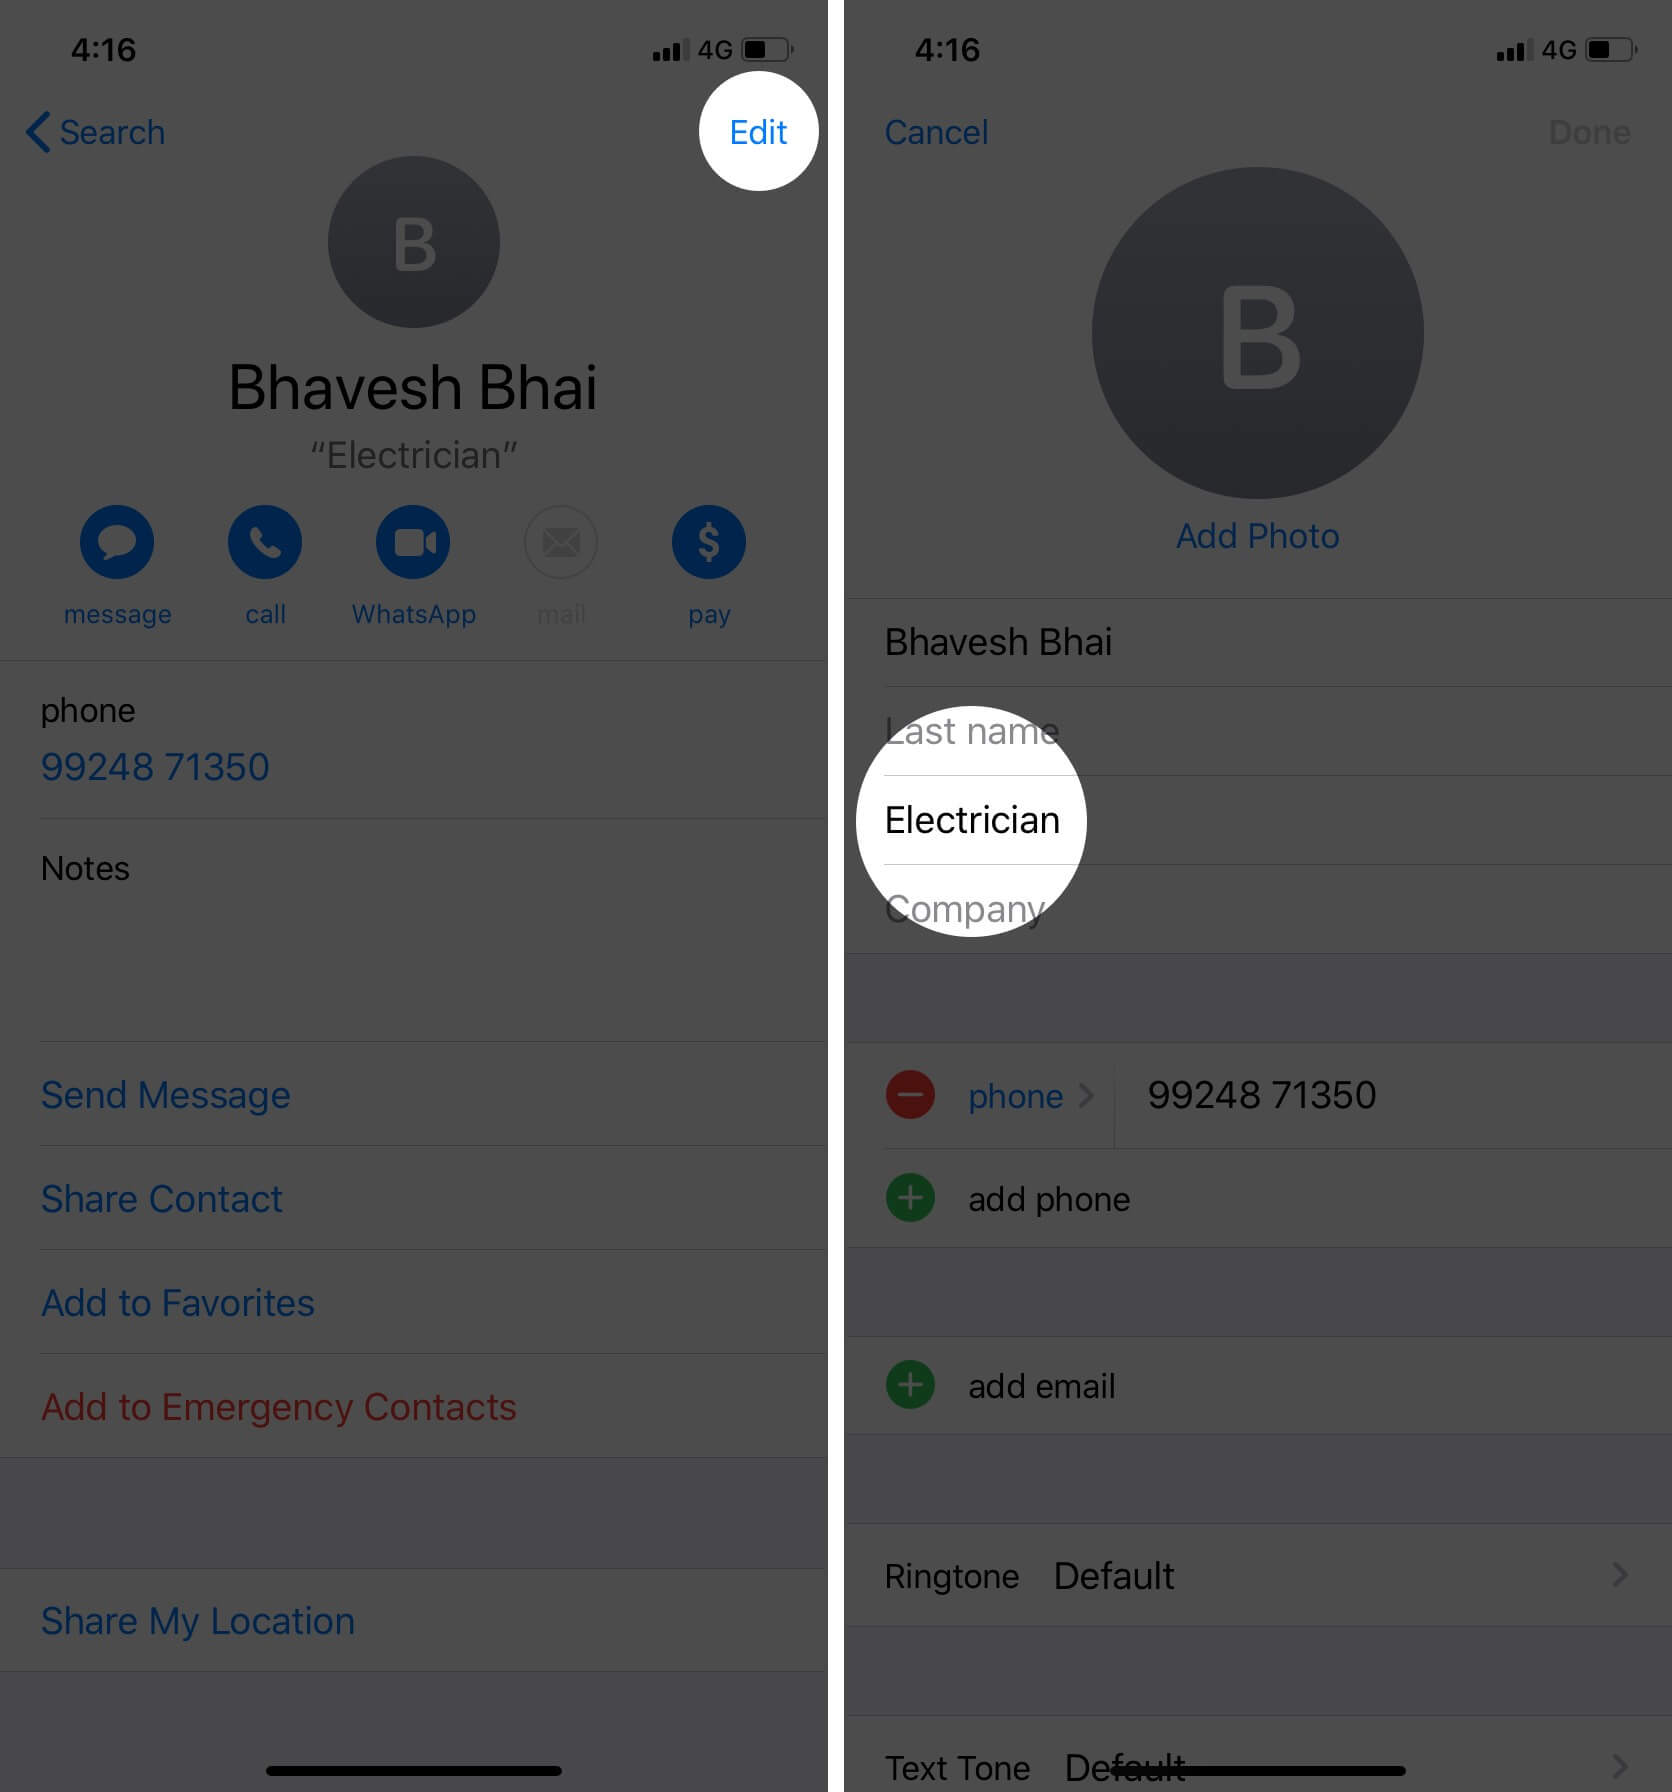 Open iPhone Contacts app and select Contact with nickname